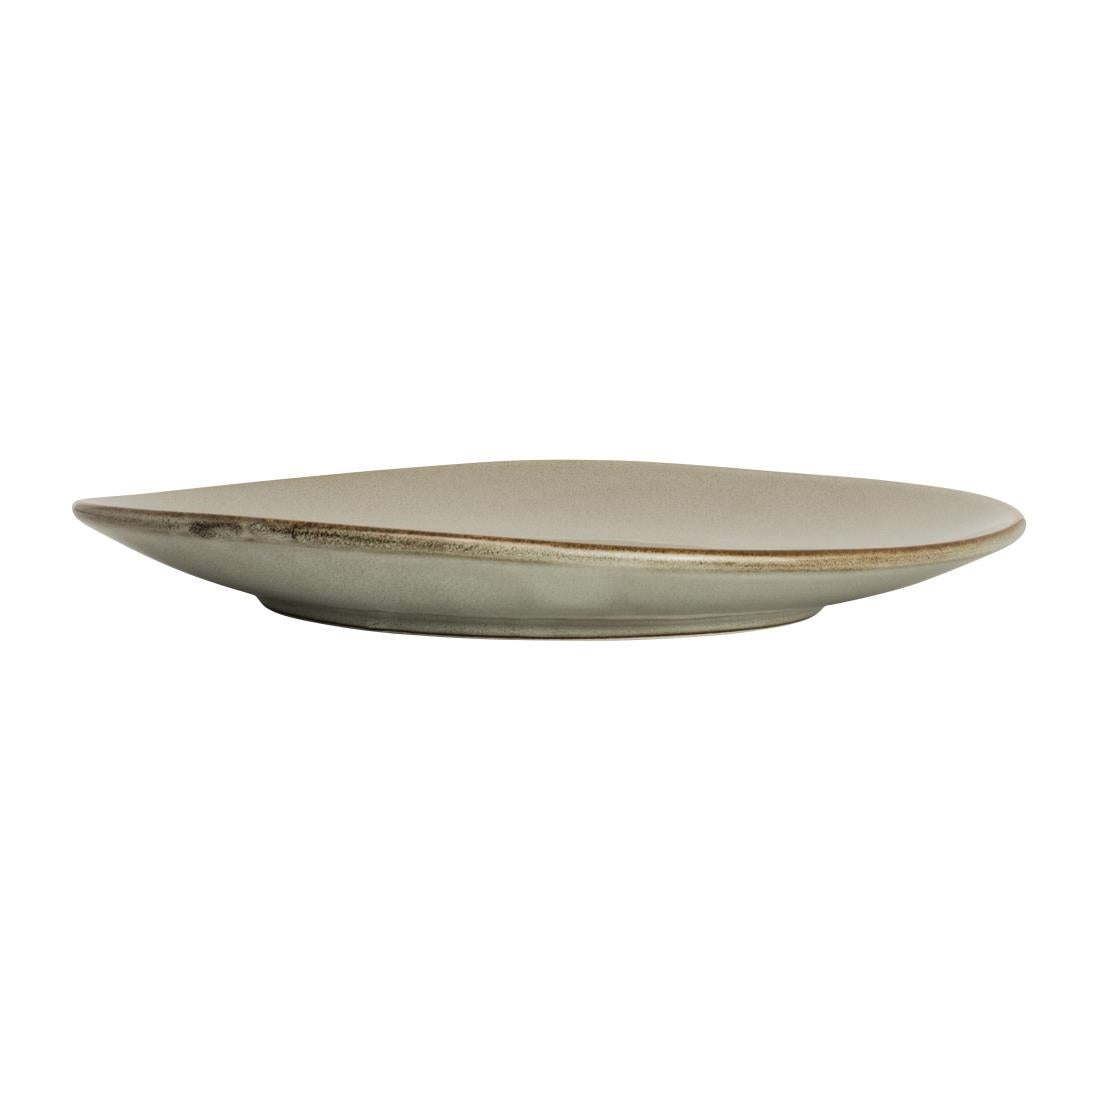 VV2627 Robert Gordon Potters Collection Pier Organic Plates 235mm (Pack of 24)